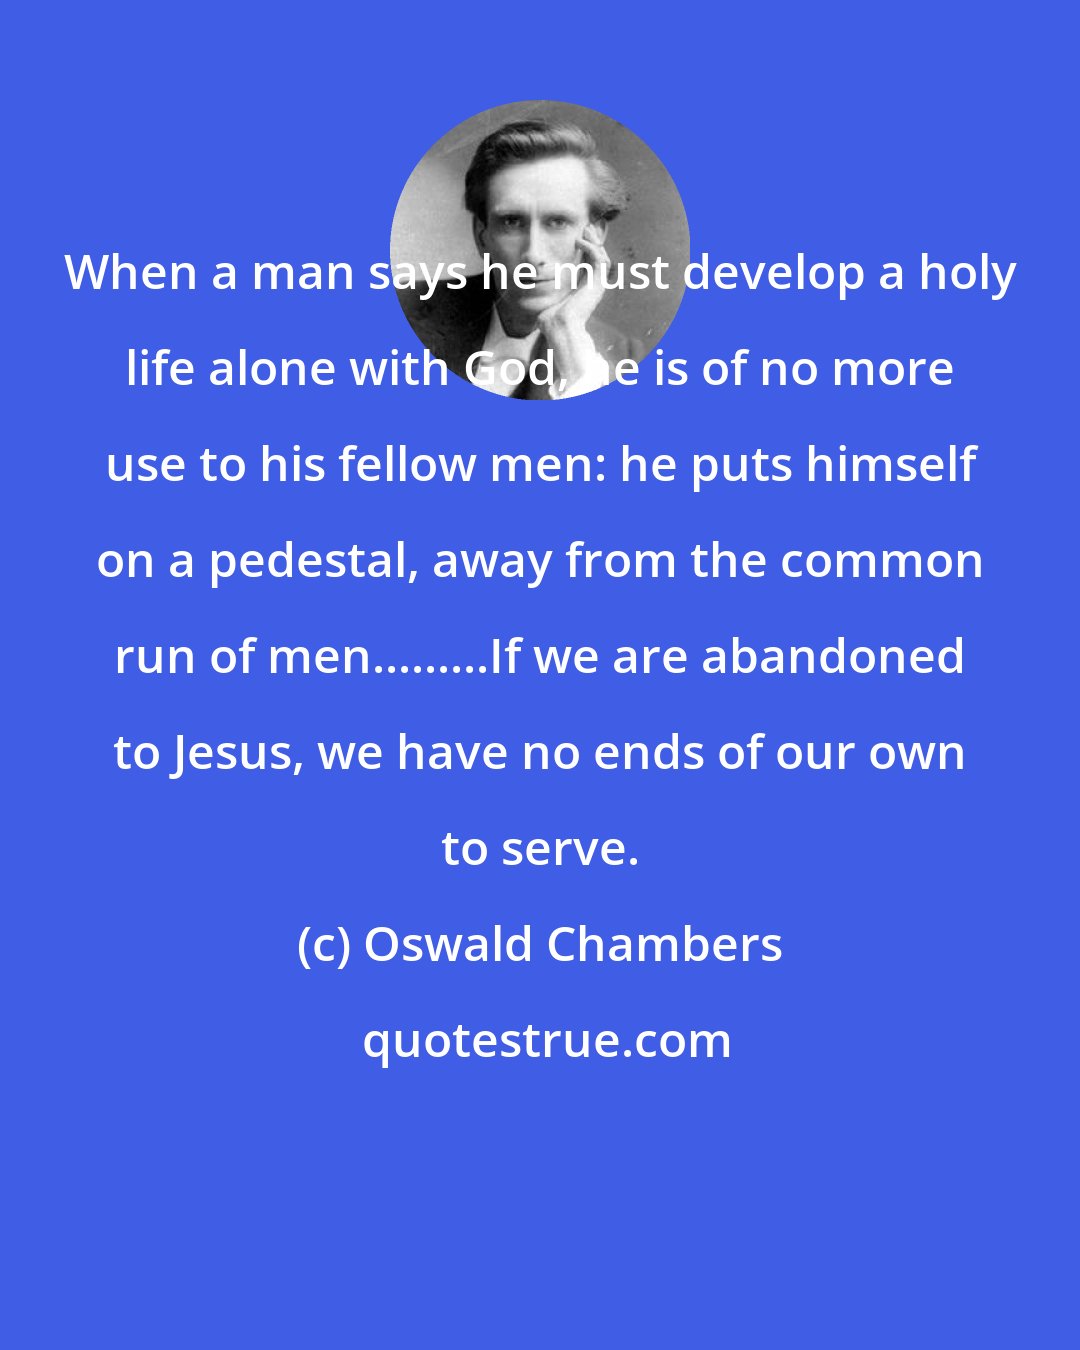 Oswald Chambers: When a man says he must develop a holy life alone with God, he is of no more use to his fellow men: he puts himself on a pedestal, away from the common run of men.........If we are abandoned to Jesus, we have no ends of our own to serve.